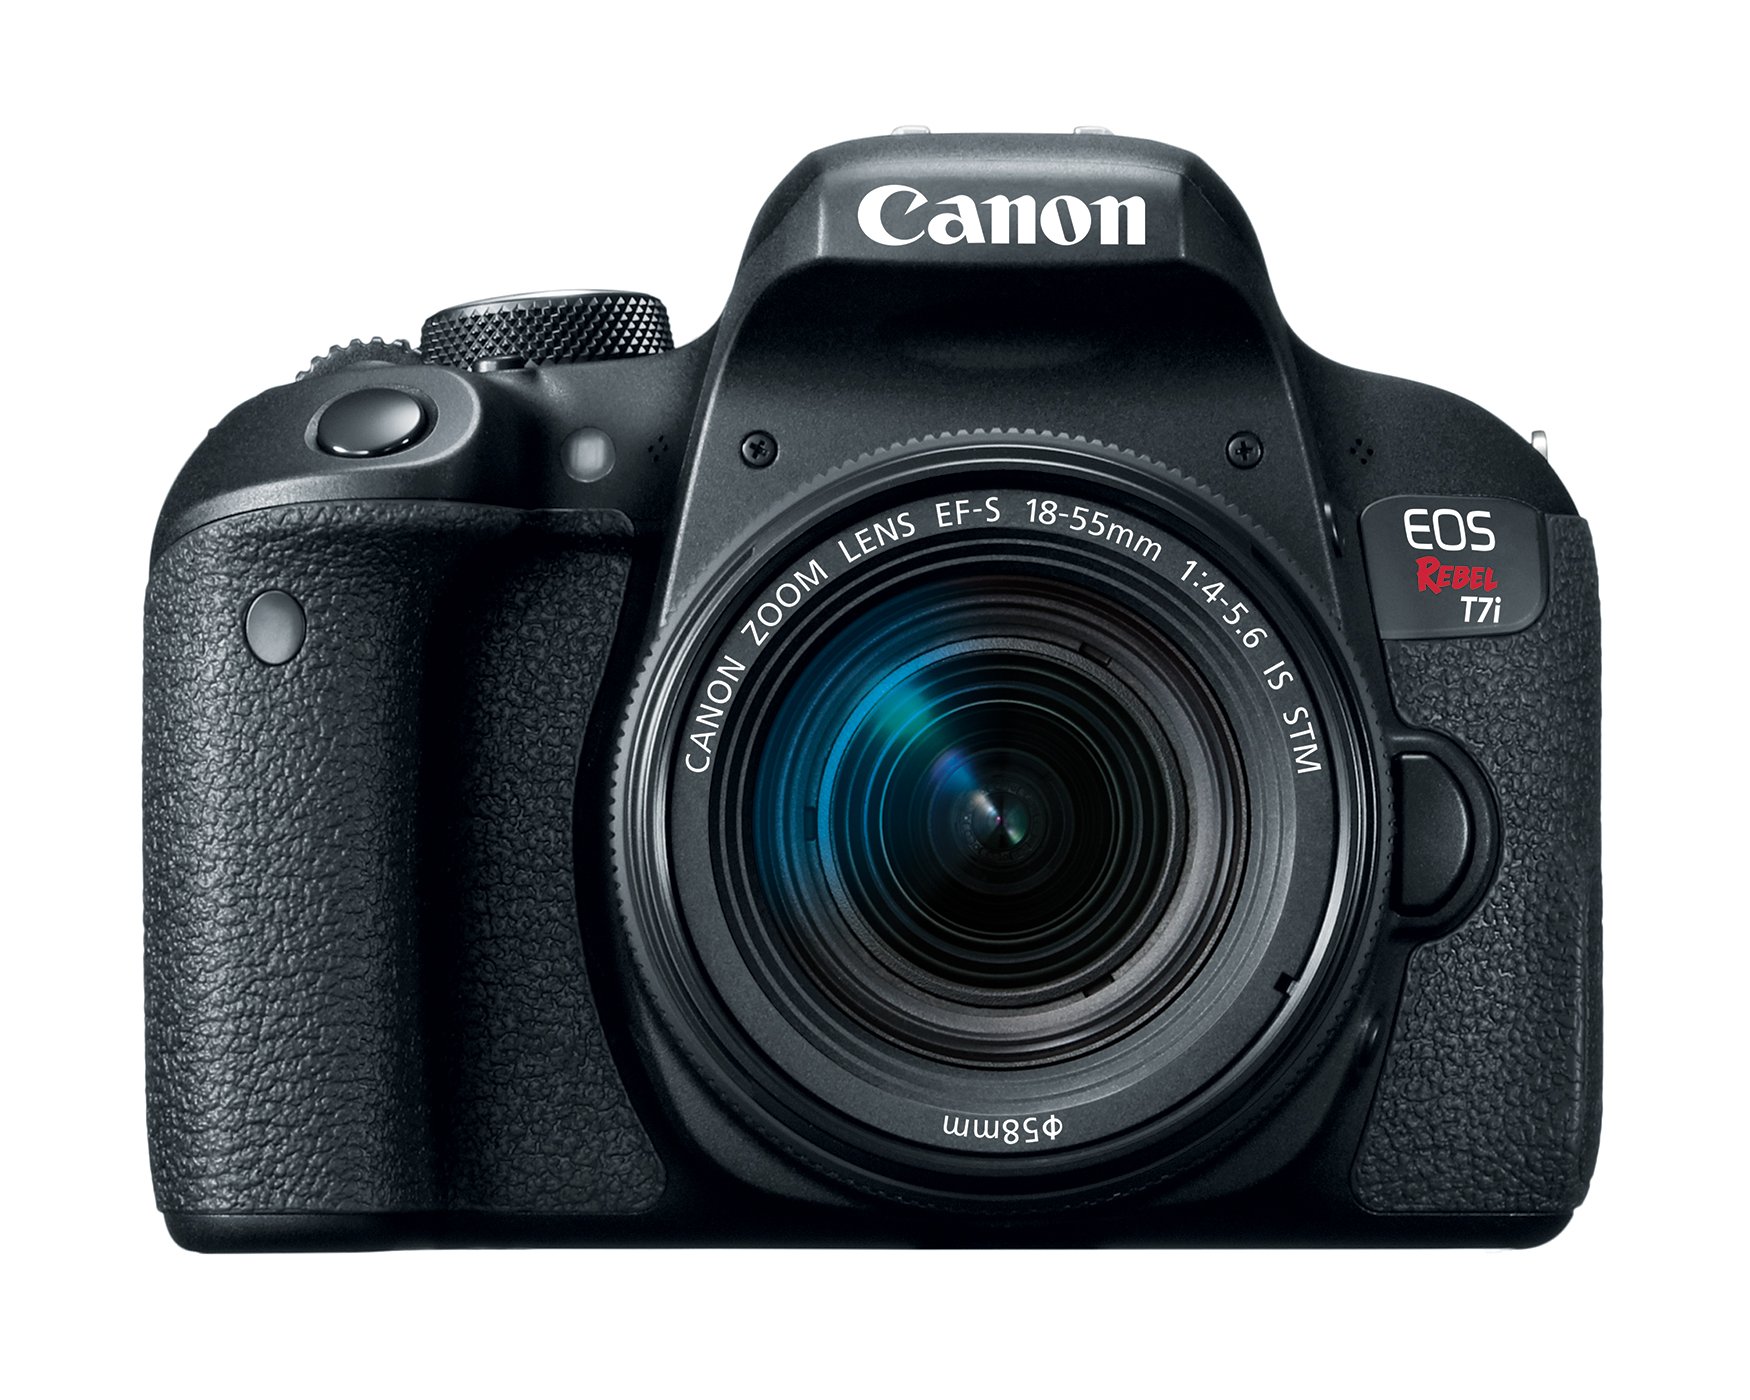 Canon EOS Rebel T7i DSLR Camera with 18-55mm Lens - image 4 of 7